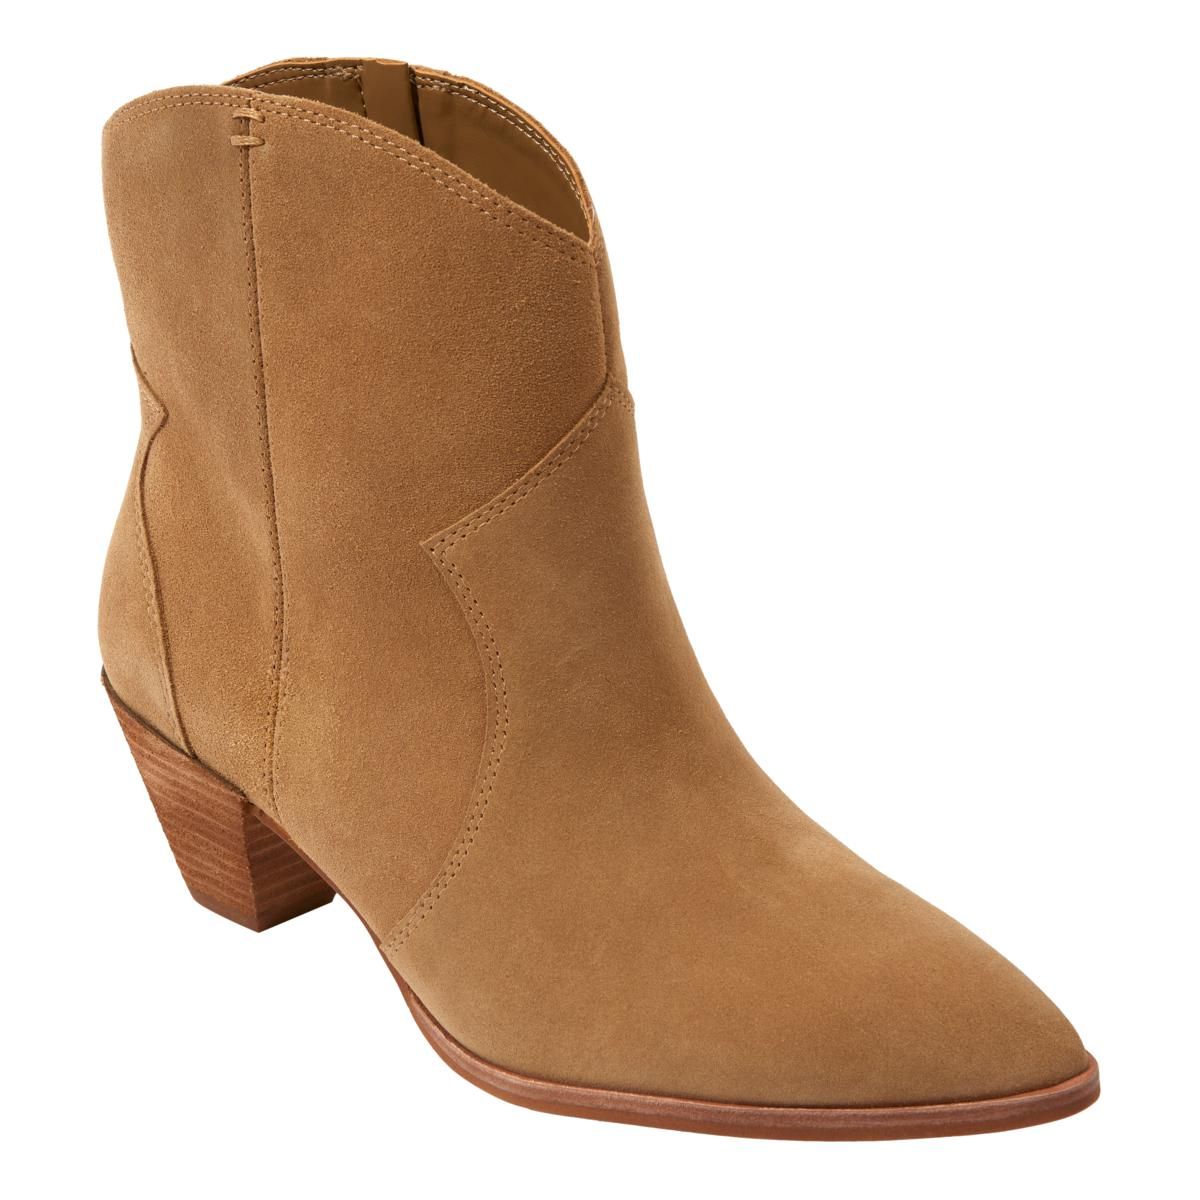 Vince Camuto Salintino Leather/Suede Western Boot - 20846351 | HSN | HSN